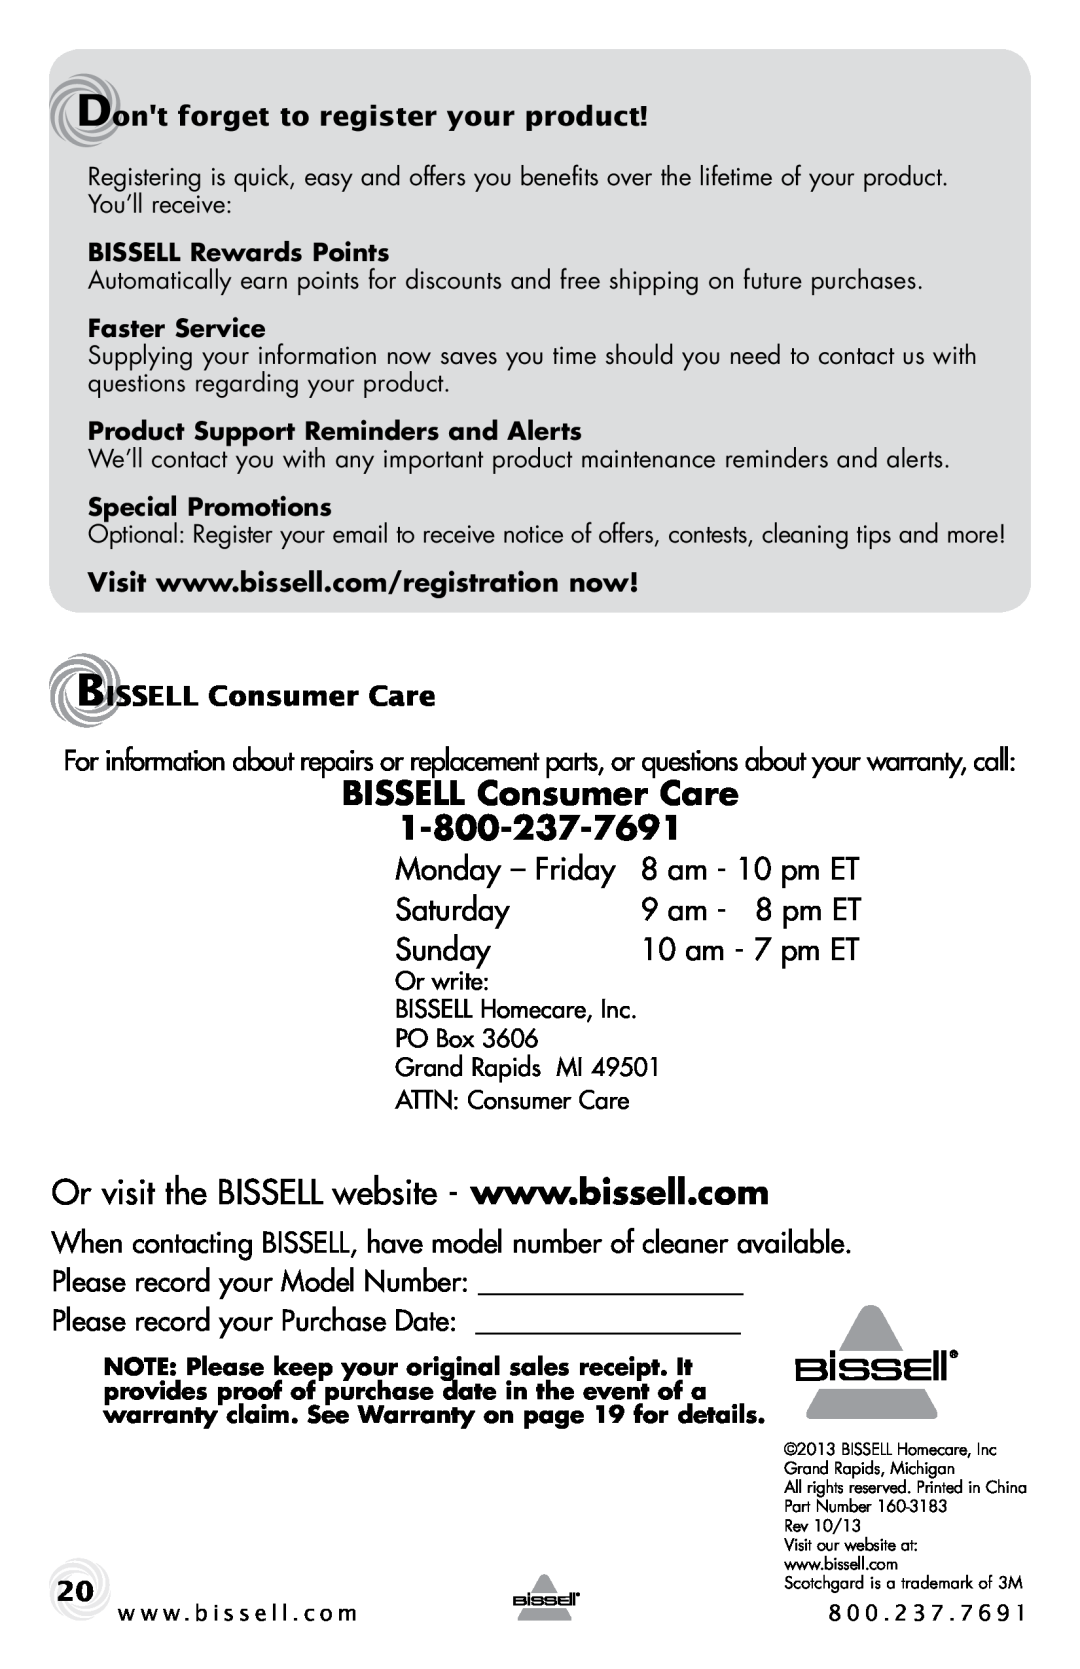 Bissell 66E1 BISSELL Consumer Care, Dont forget to register your product, Monday - Friday, Saturday, am - 8 pm ET, Sunday 